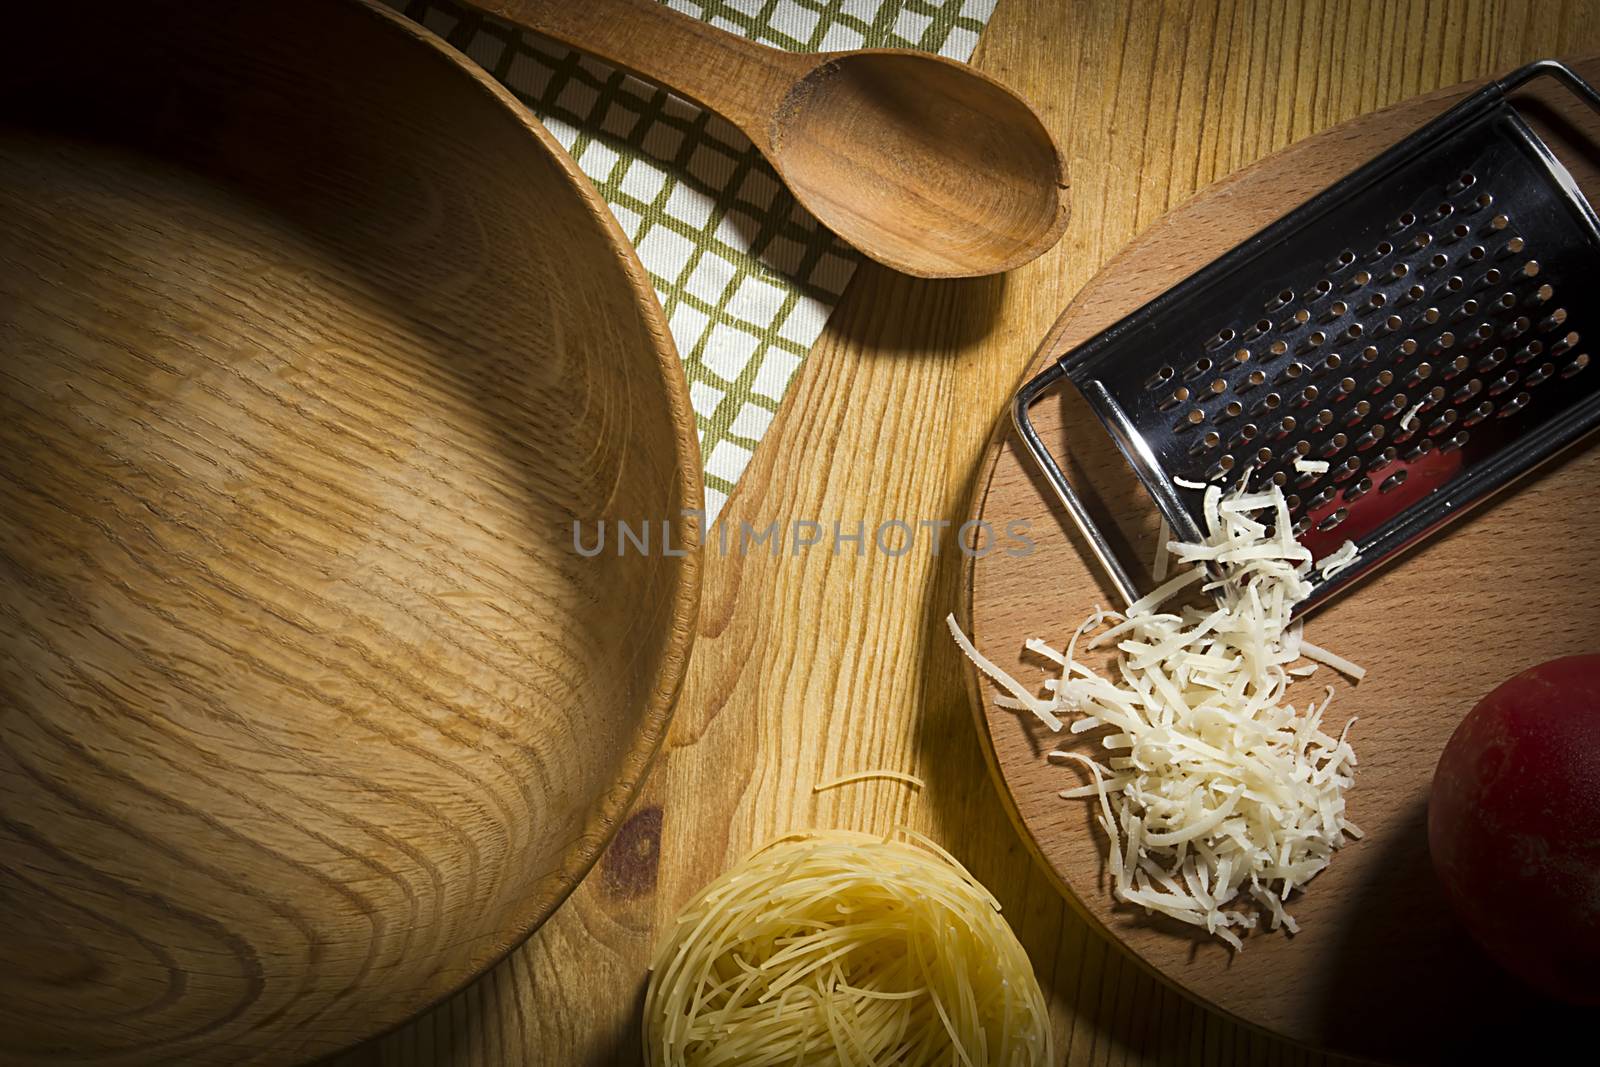 Wooden utensils and metal grater with ingredients for making pasta